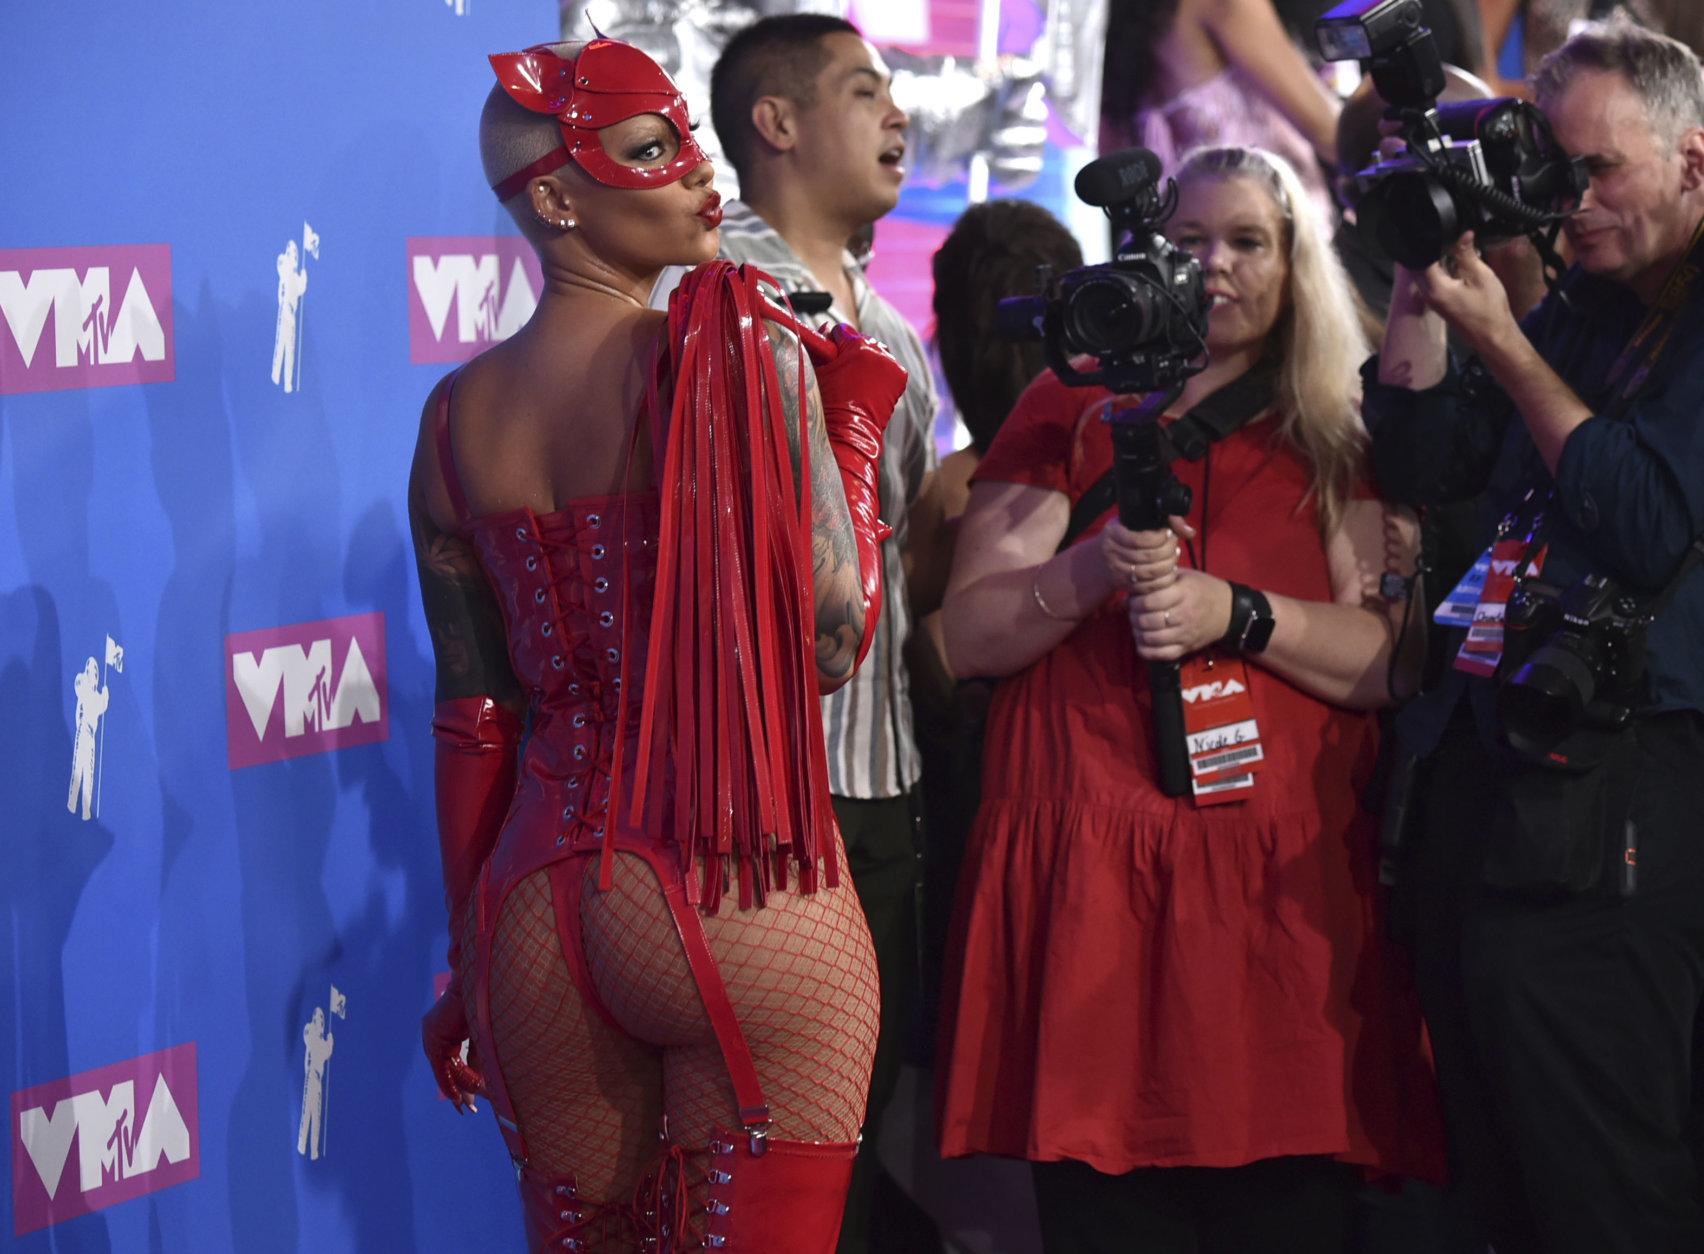 Amber Rose arrives at the MTV Video Music Awards at Radio City Music Hall on Monday, Aug. 20, 2018, in New York. (Photo by Evan Agostini/Invision/AP)